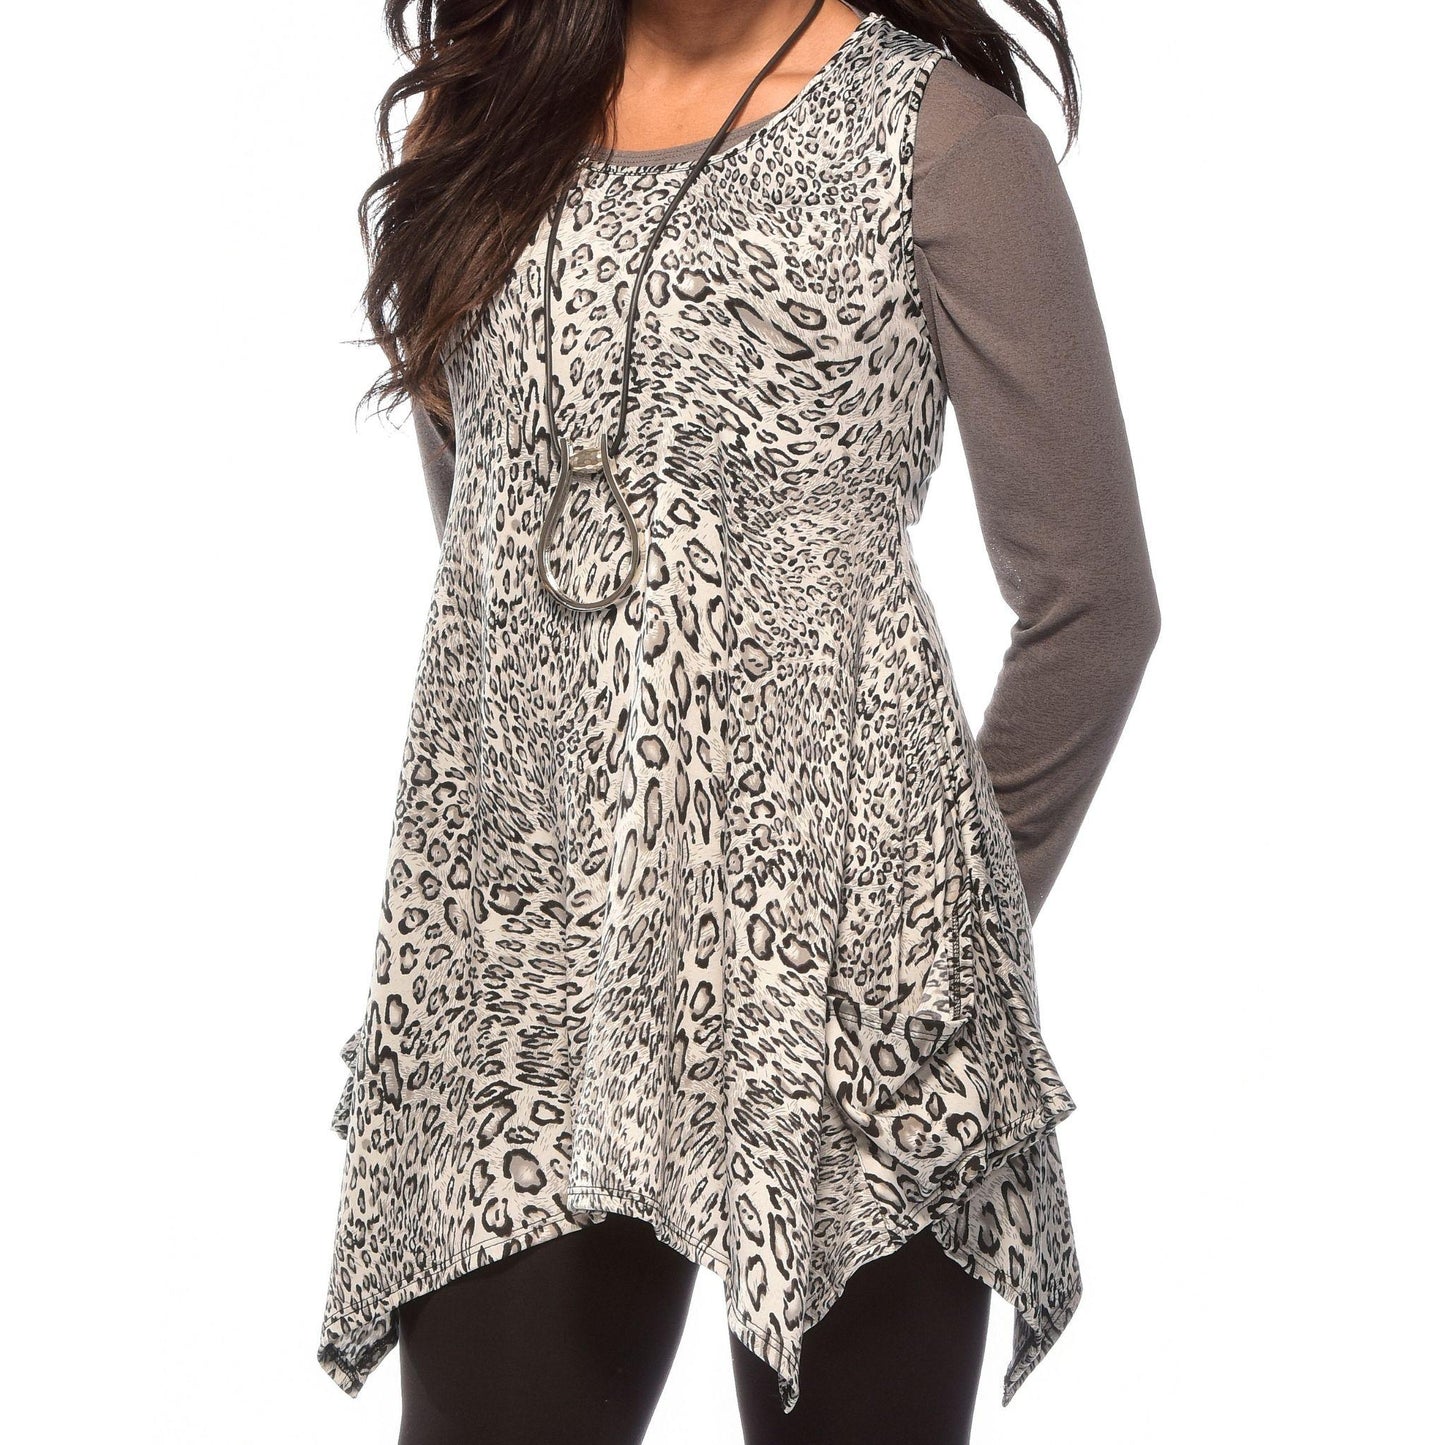 Double Pocketed Top/Tunic